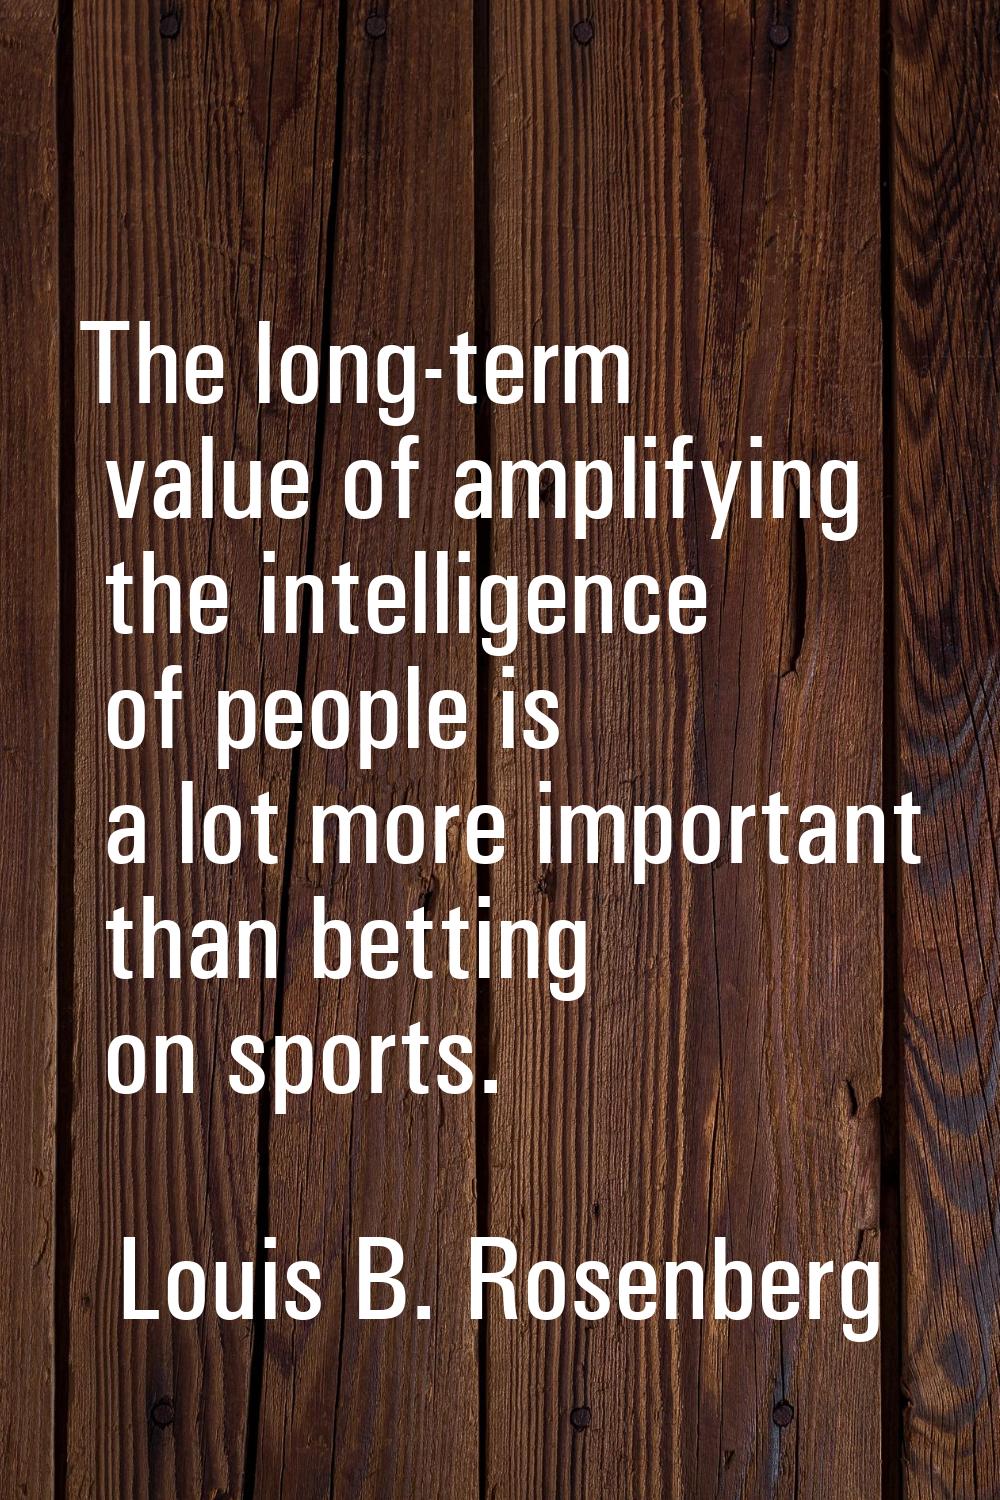 The long-term value of amplifying the intelligence of people is a lot more important than betting o